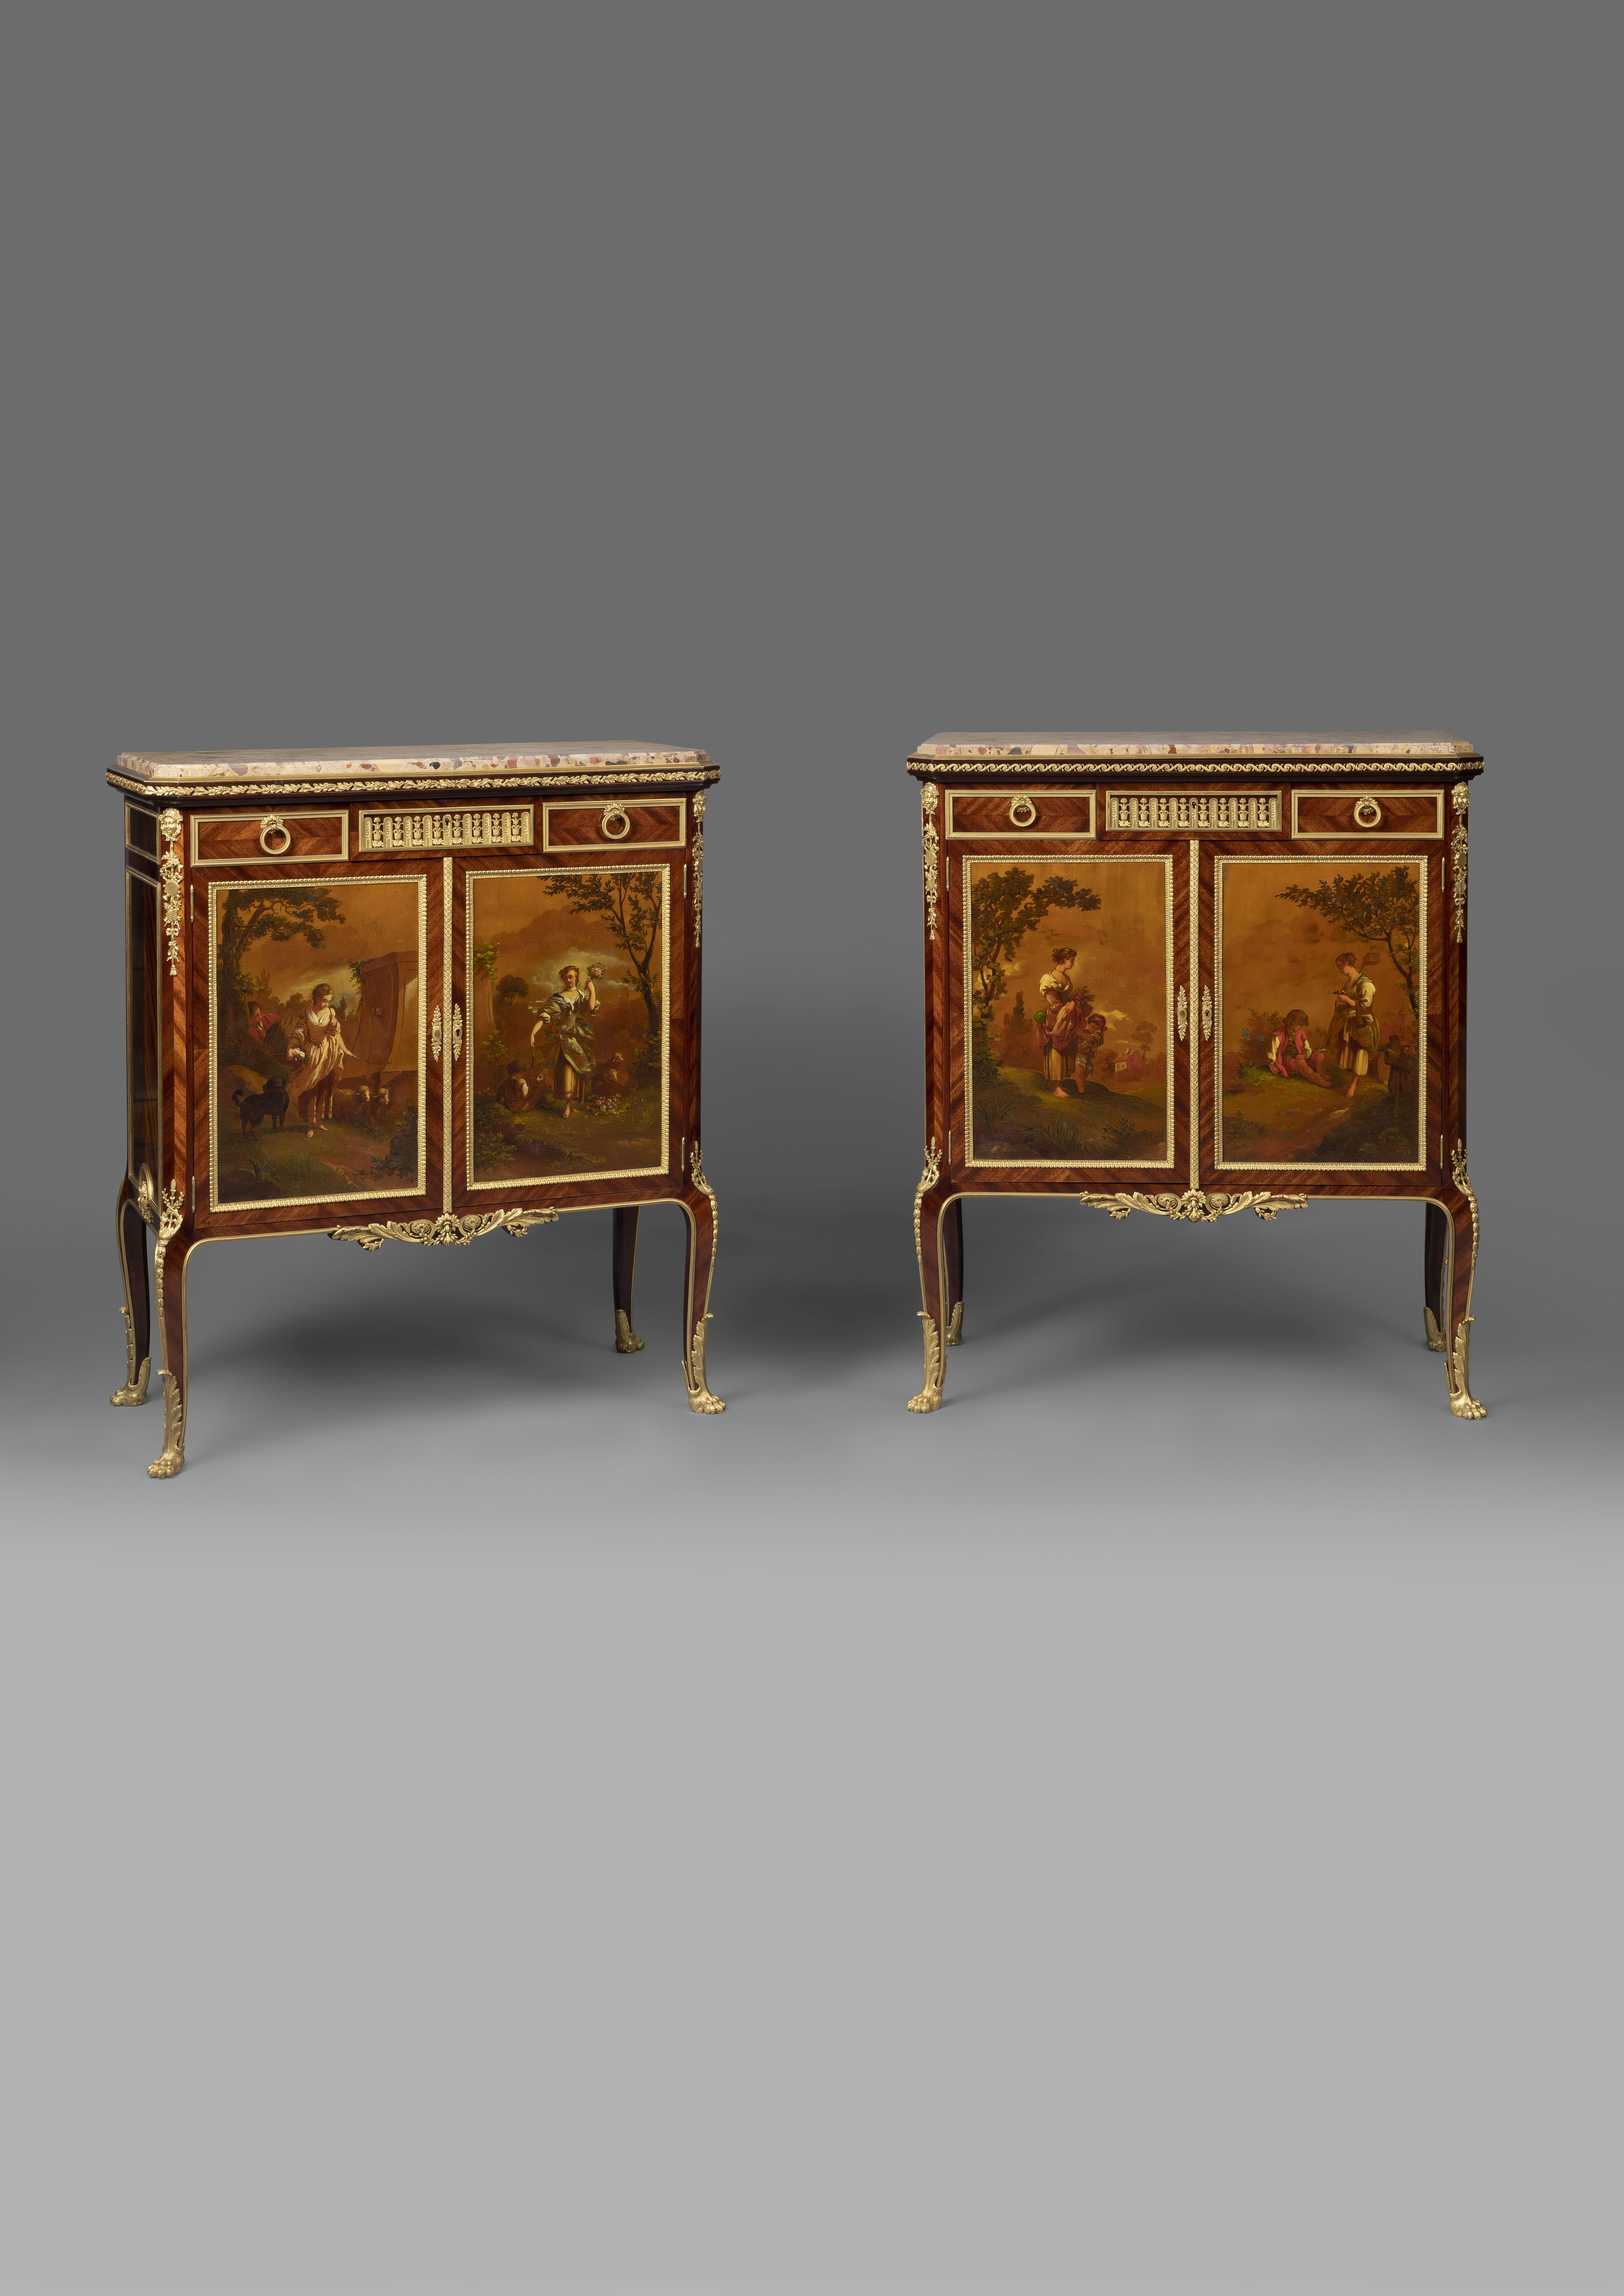 A fine pair of Louis XVI Style gilt bronze mounted mahogany and Vernis Martin side cabinets, attributed to François Linke.

French, circa 1900. 

Although unsigned this Fine pair of side cabinets can be firmly attributed to François Linke. The